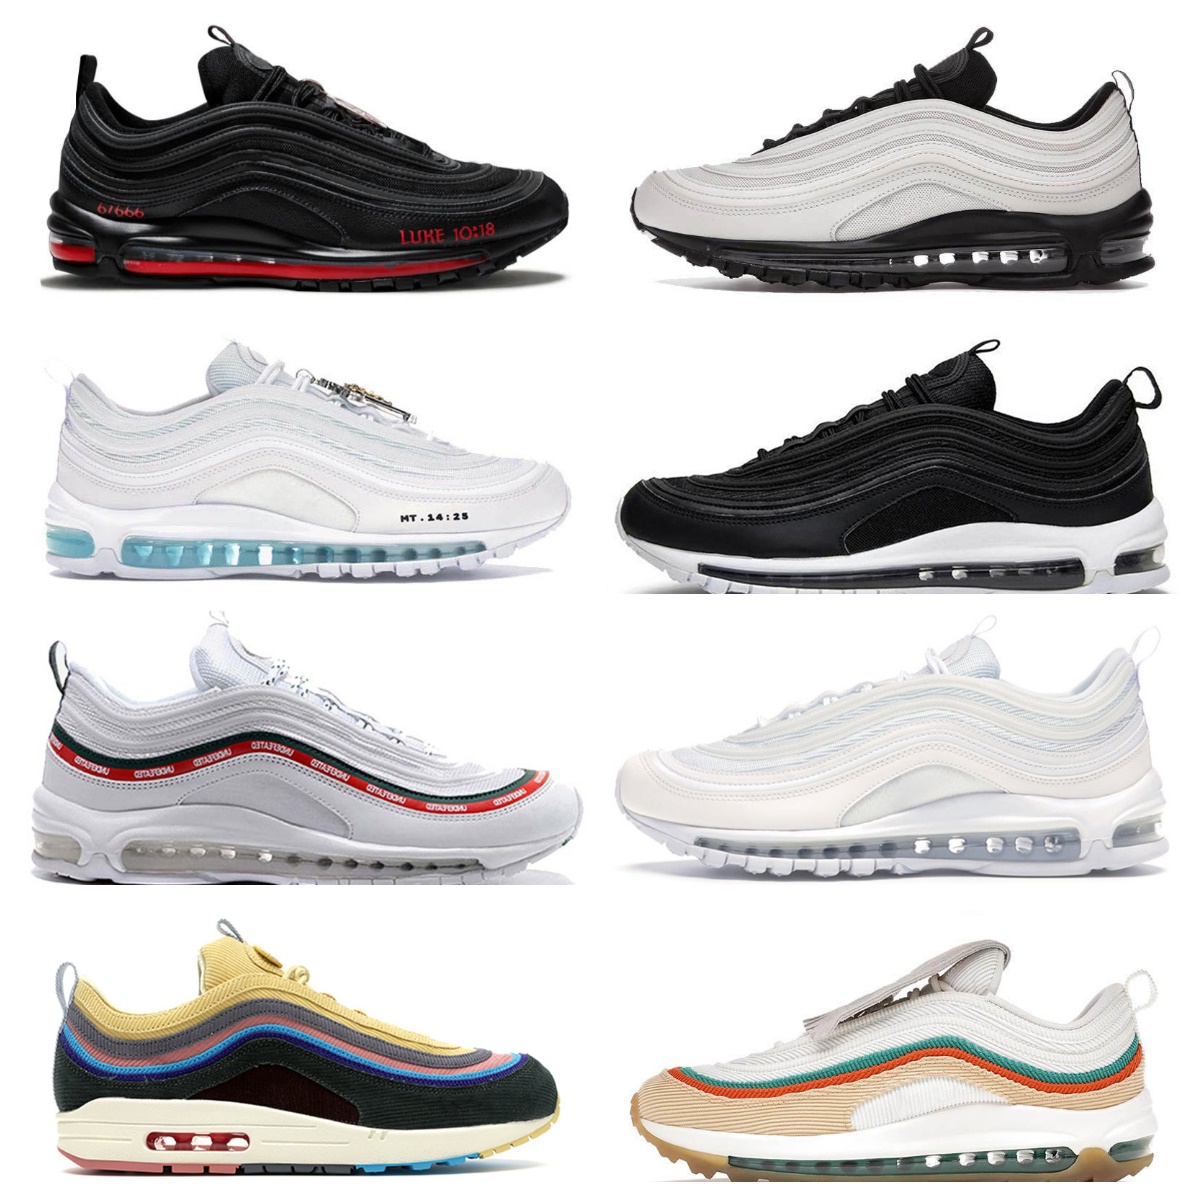 

Max97 97 Casual Shoes Undefeated 97s OG Mens Women Sean Wotherspoon mschf x inri jesus triple black white Worldwide Sail Treeline sliver bullet metalic gold sneakers, Bubble package bag